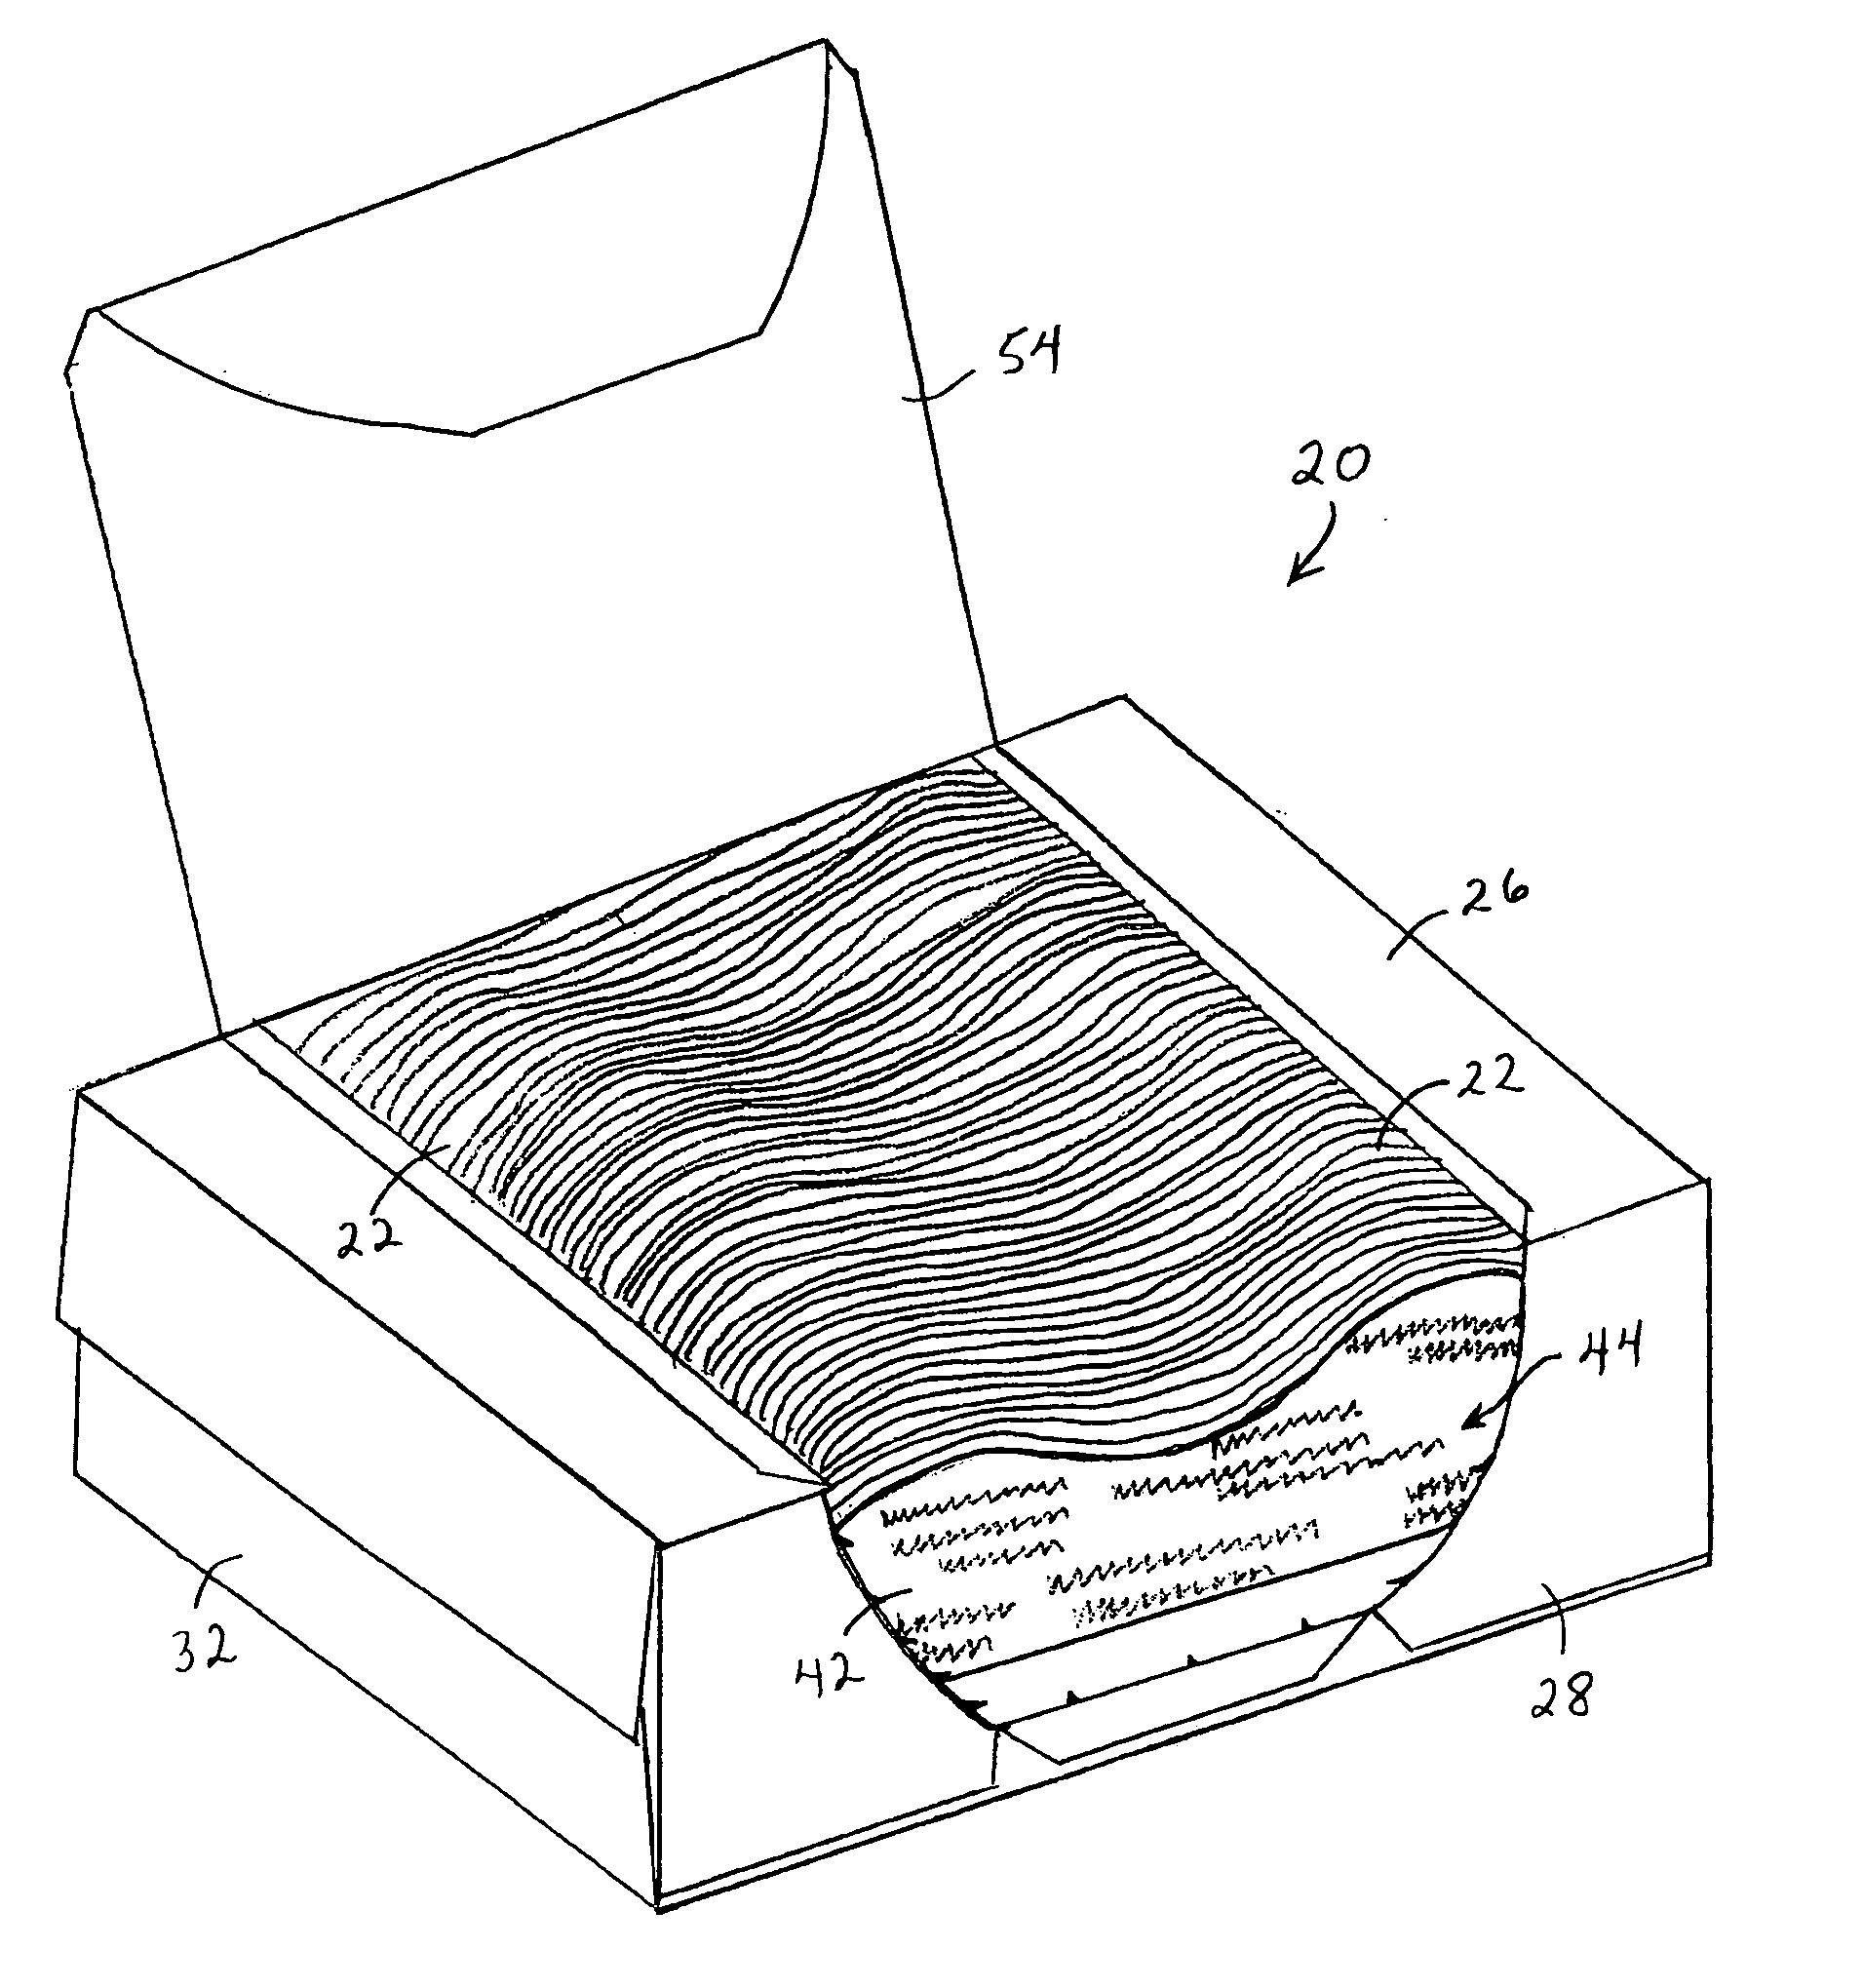 Package having an opening mechanism and containing selectively oriented absorbent articles